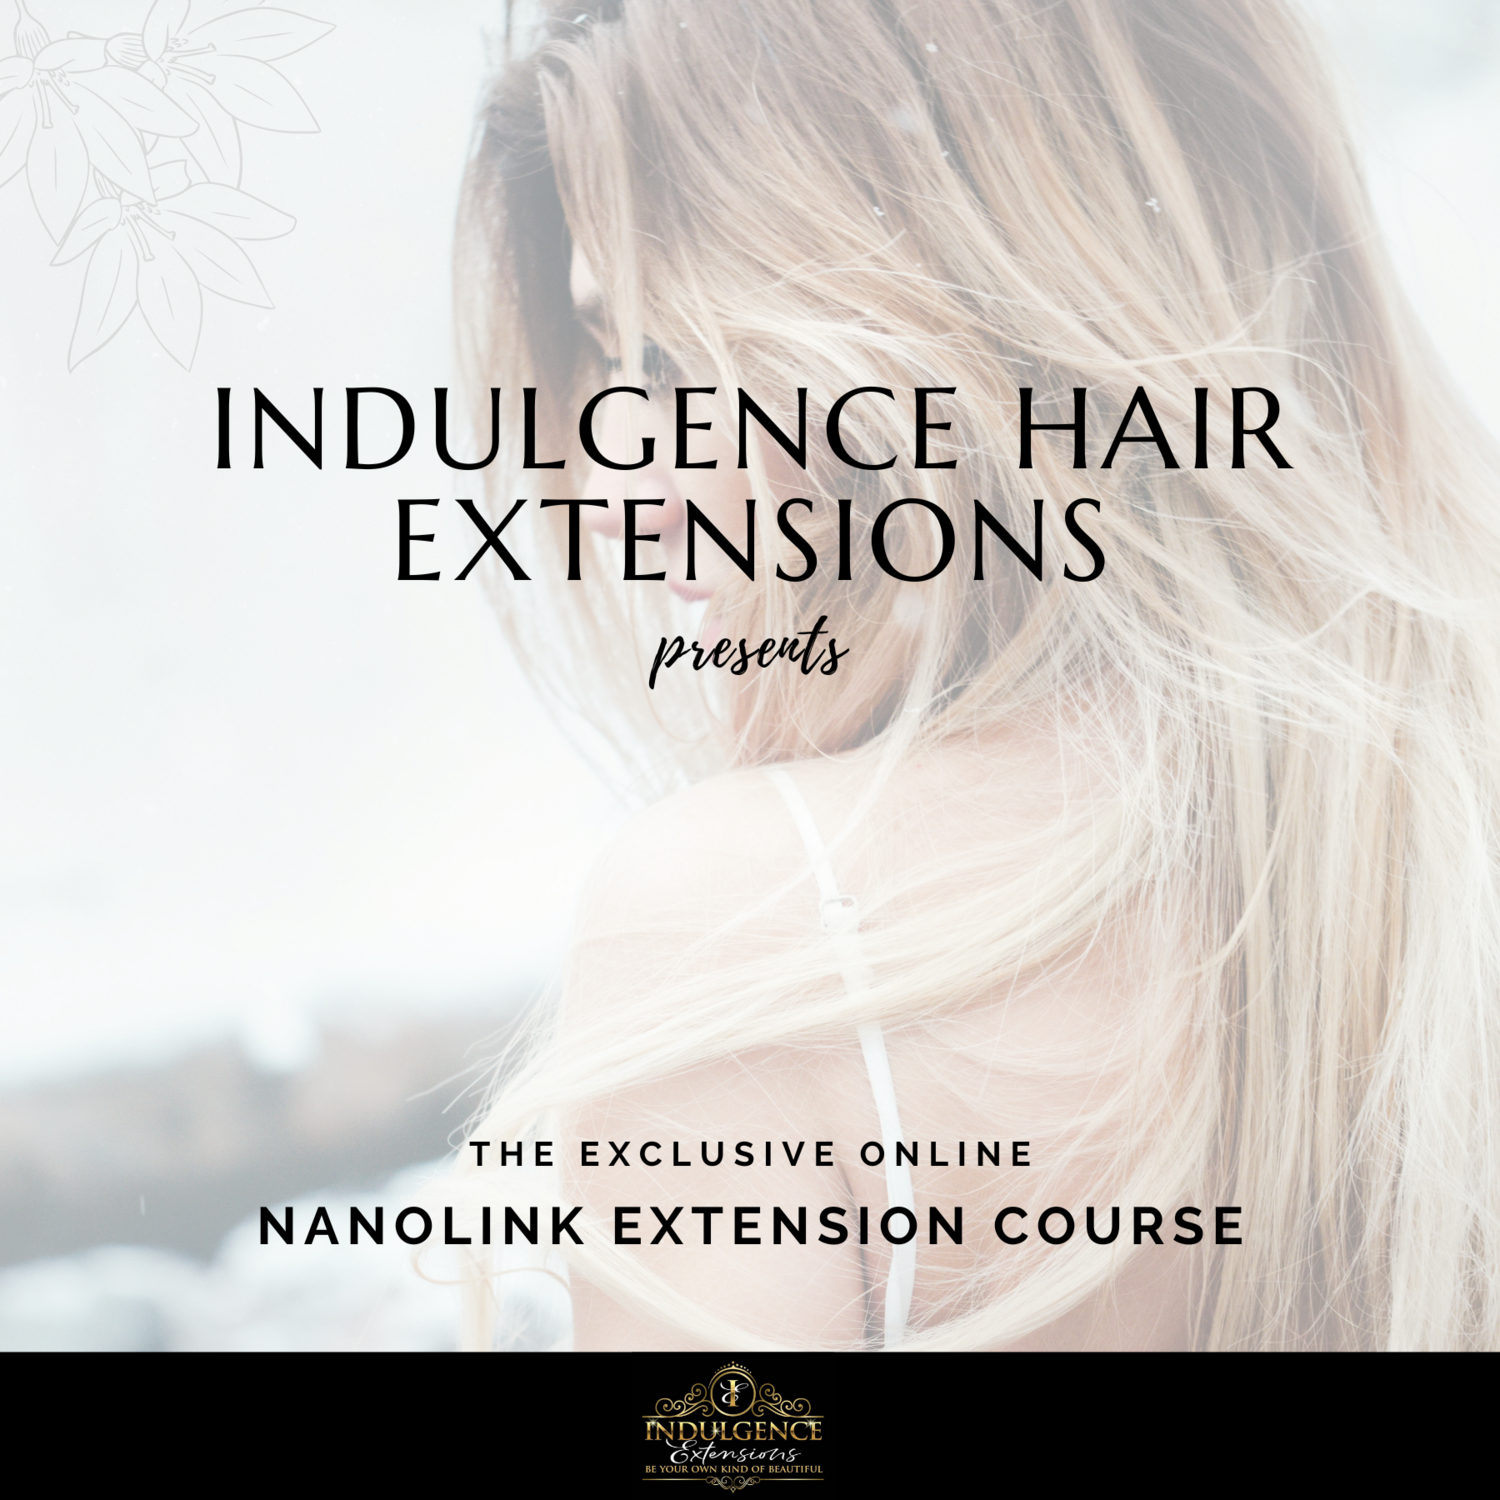 Creating hair extensions Course, Hair Extension Courses In London, UK